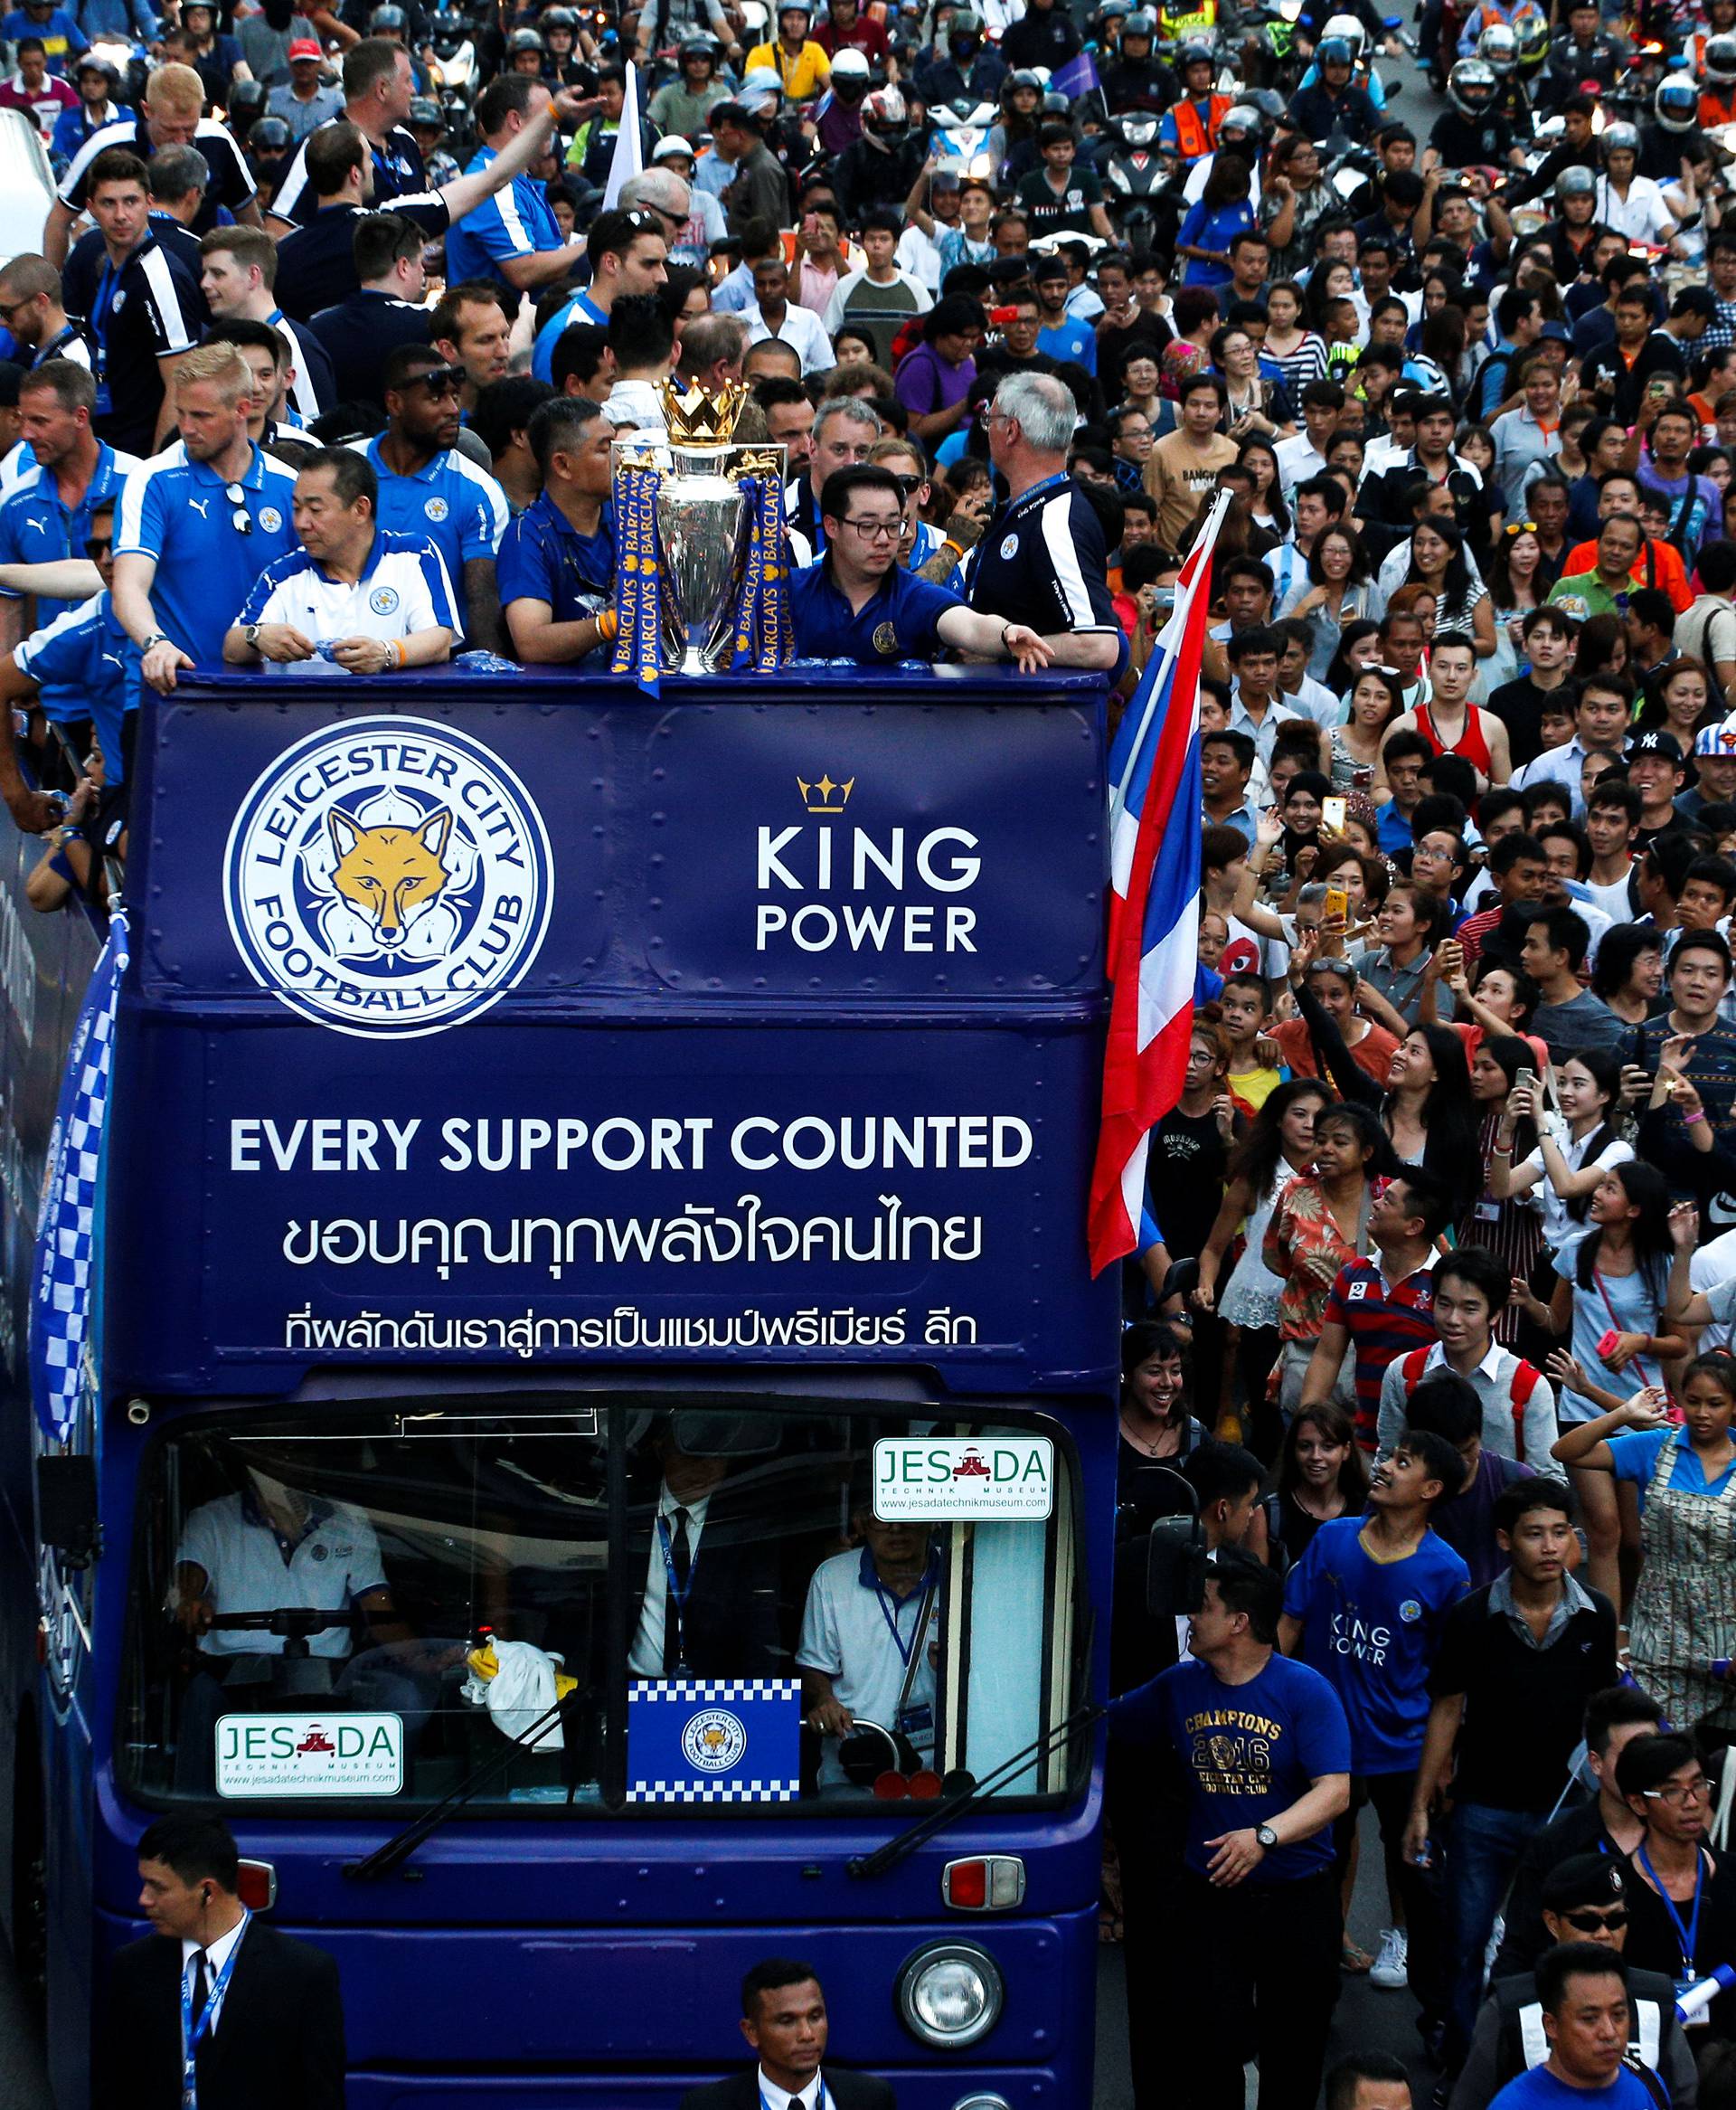 Leicester City soccer club's team members parade to celebrate club's English Premier League title in Bangkok